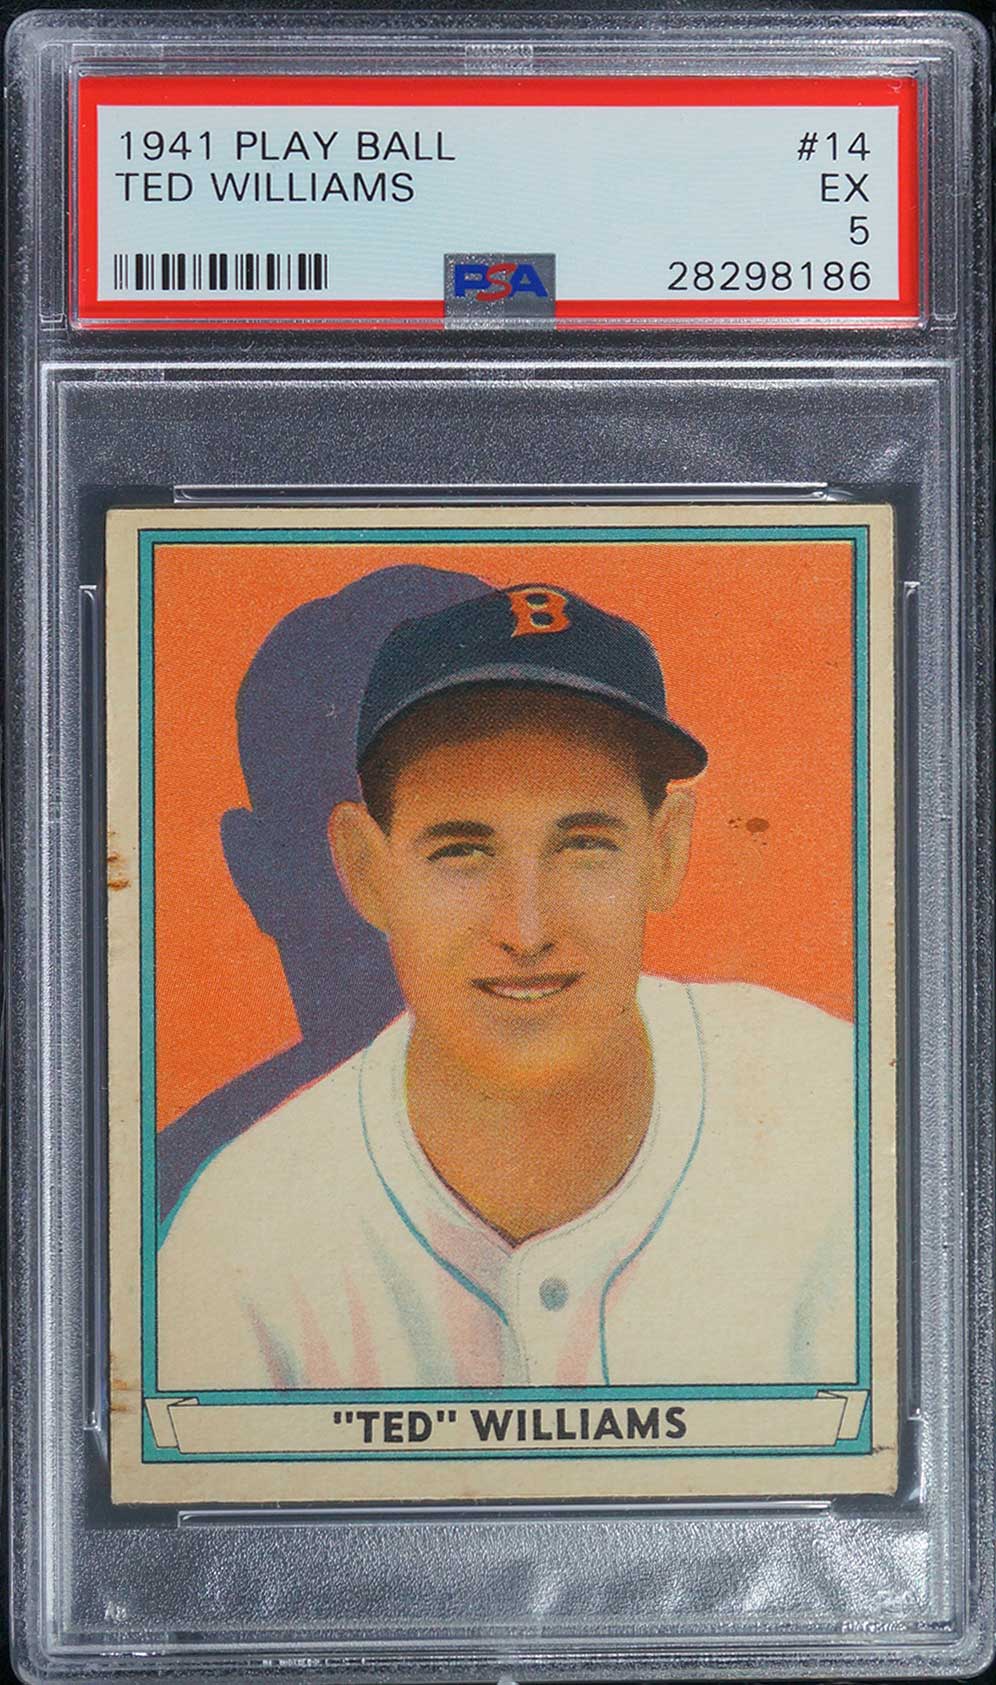 1941 Play Ball Ted Williams PSA 5 EX